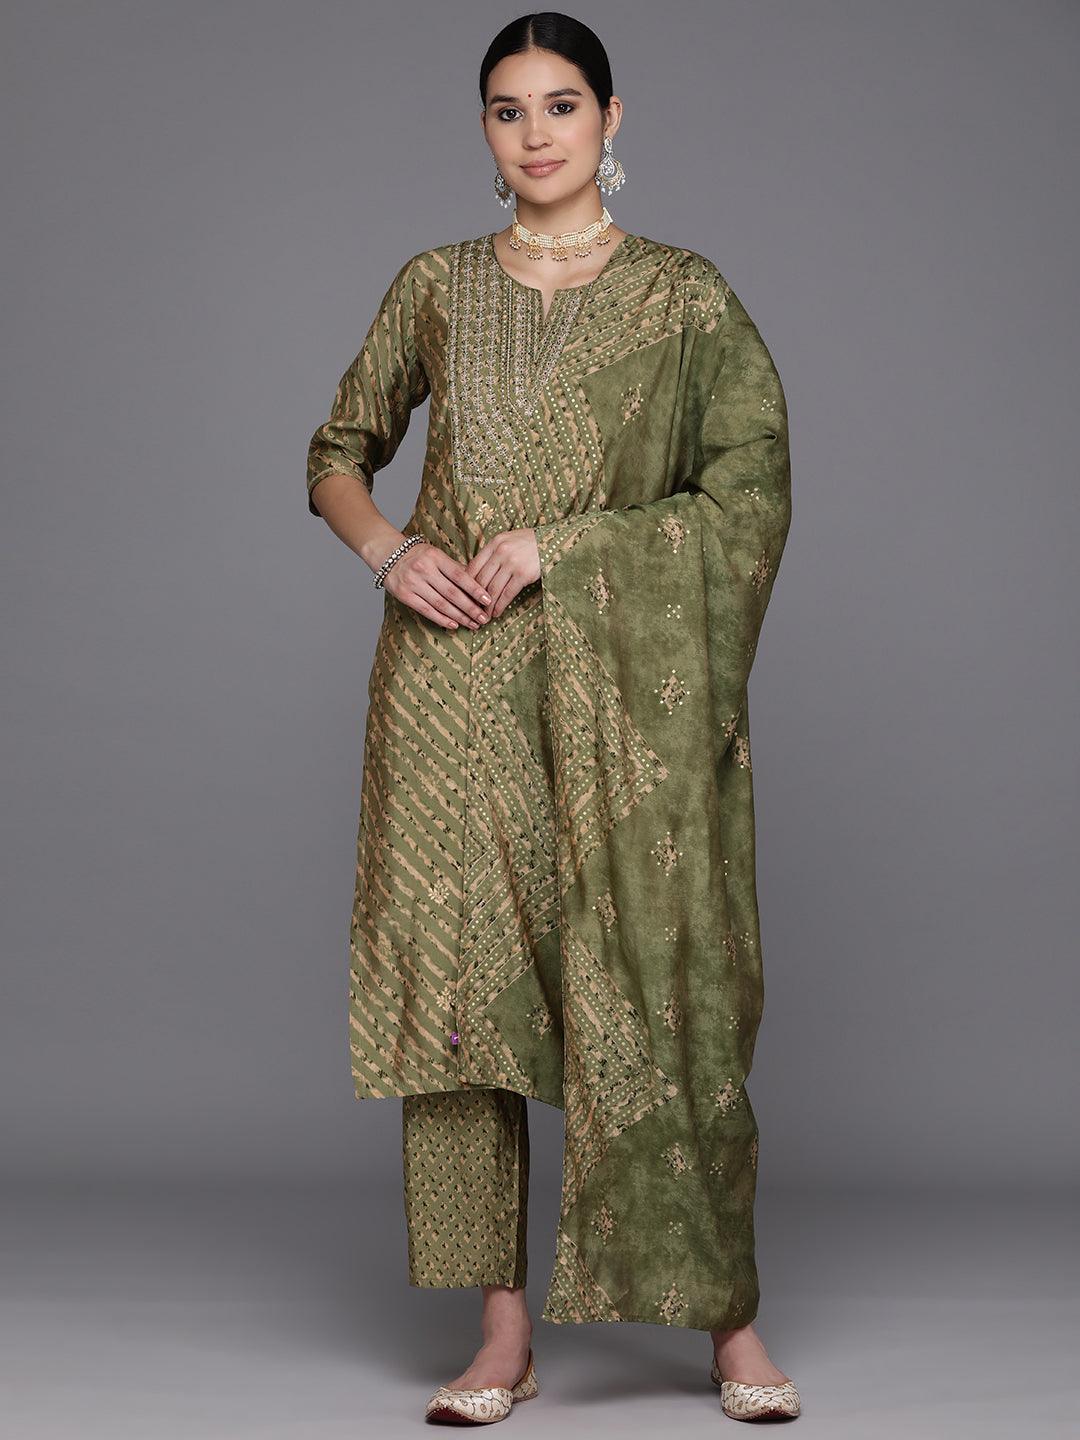 Olive Yoke Design Silk Blend Straight Suit Set With Trousers - Libas